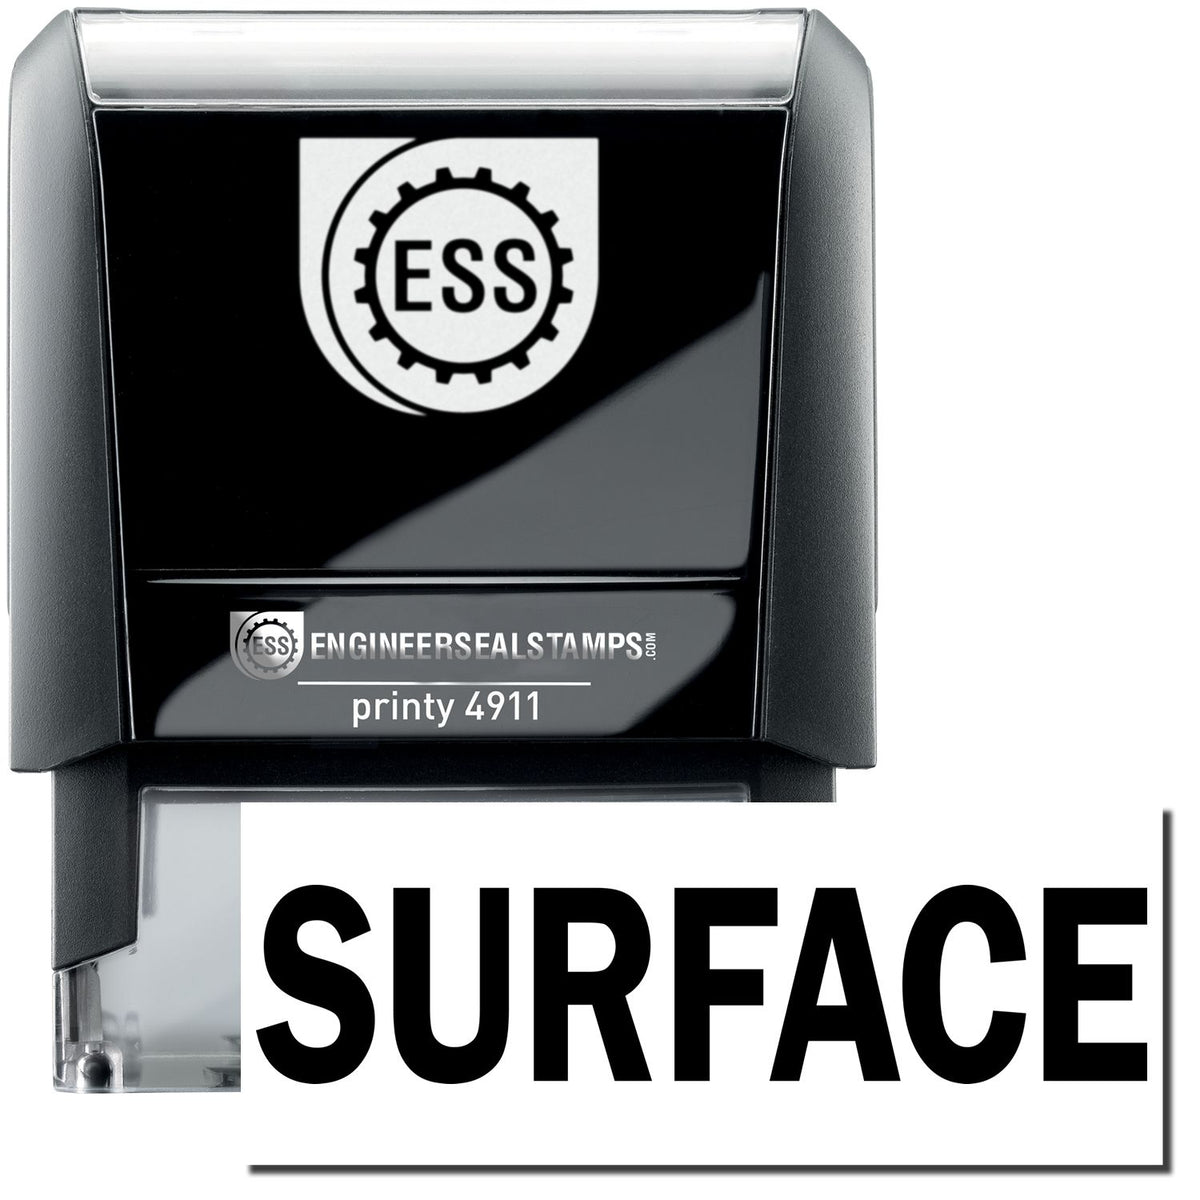 A self-inking stamp with a stamped image showing how the text &quot;SURFACE&quot; is displayed after stamping.